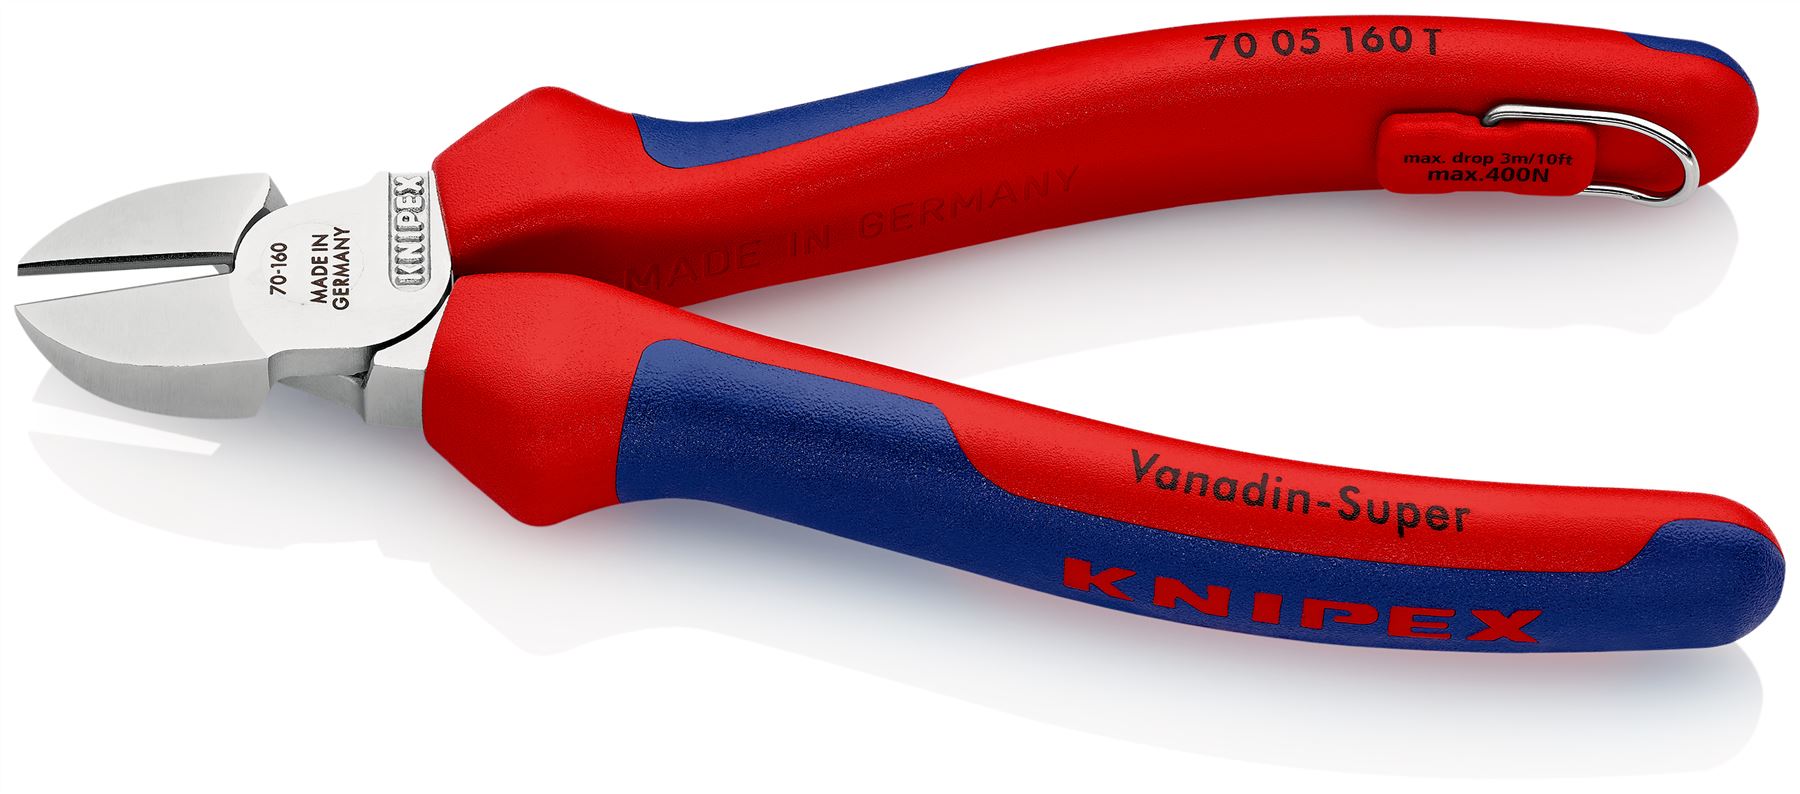 Knipex Diagonal Side Cutting Pliers Chrome 160mm Multi Component Grips with Tether Point 70 05 160 T